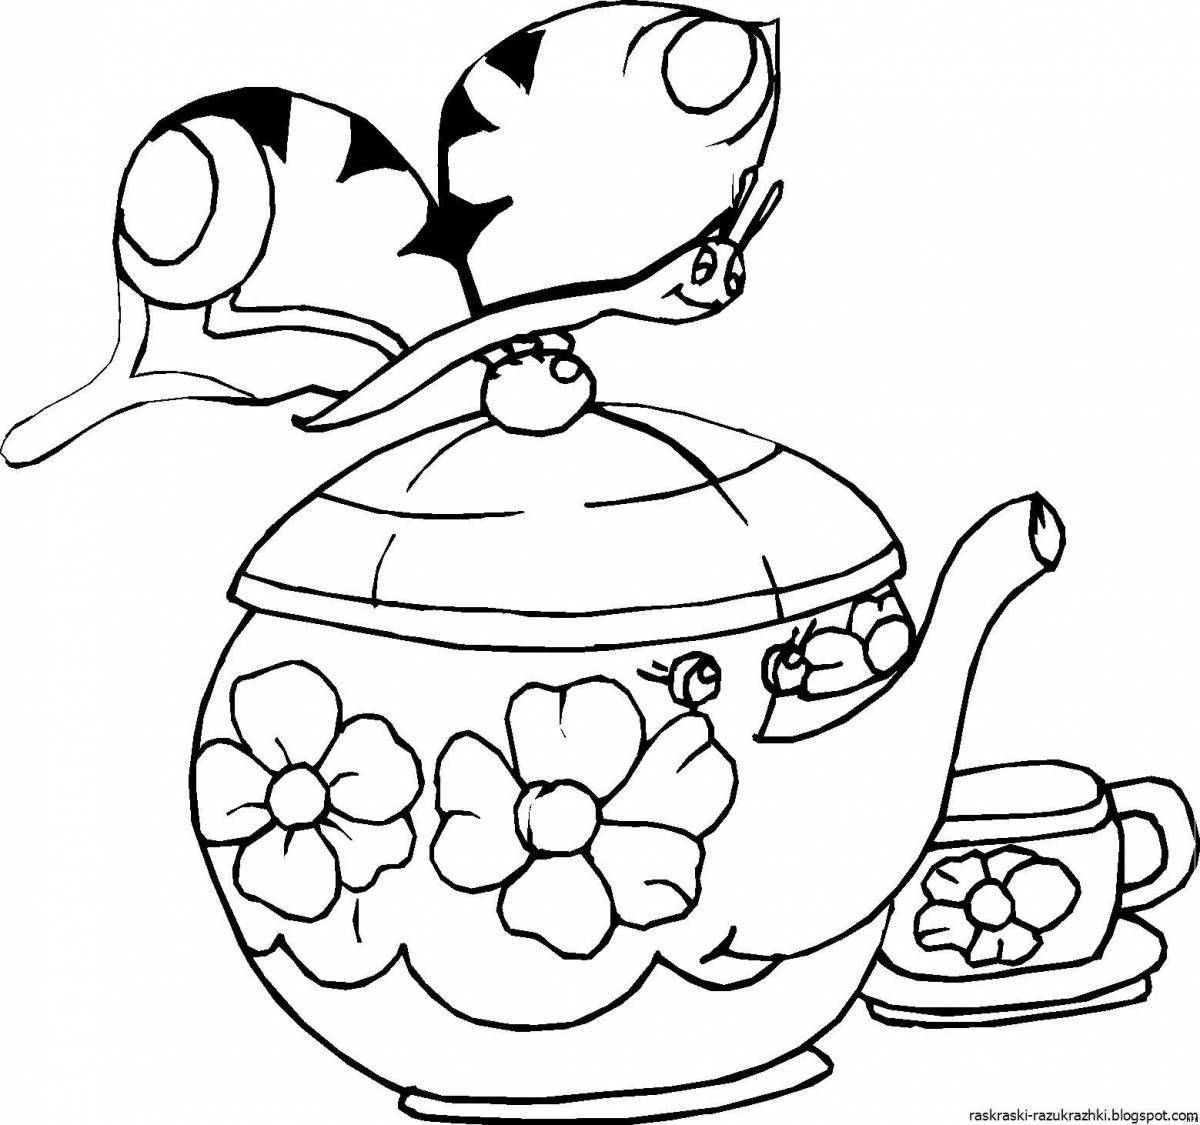 Colored teapot coloring book for 4-5 year olds